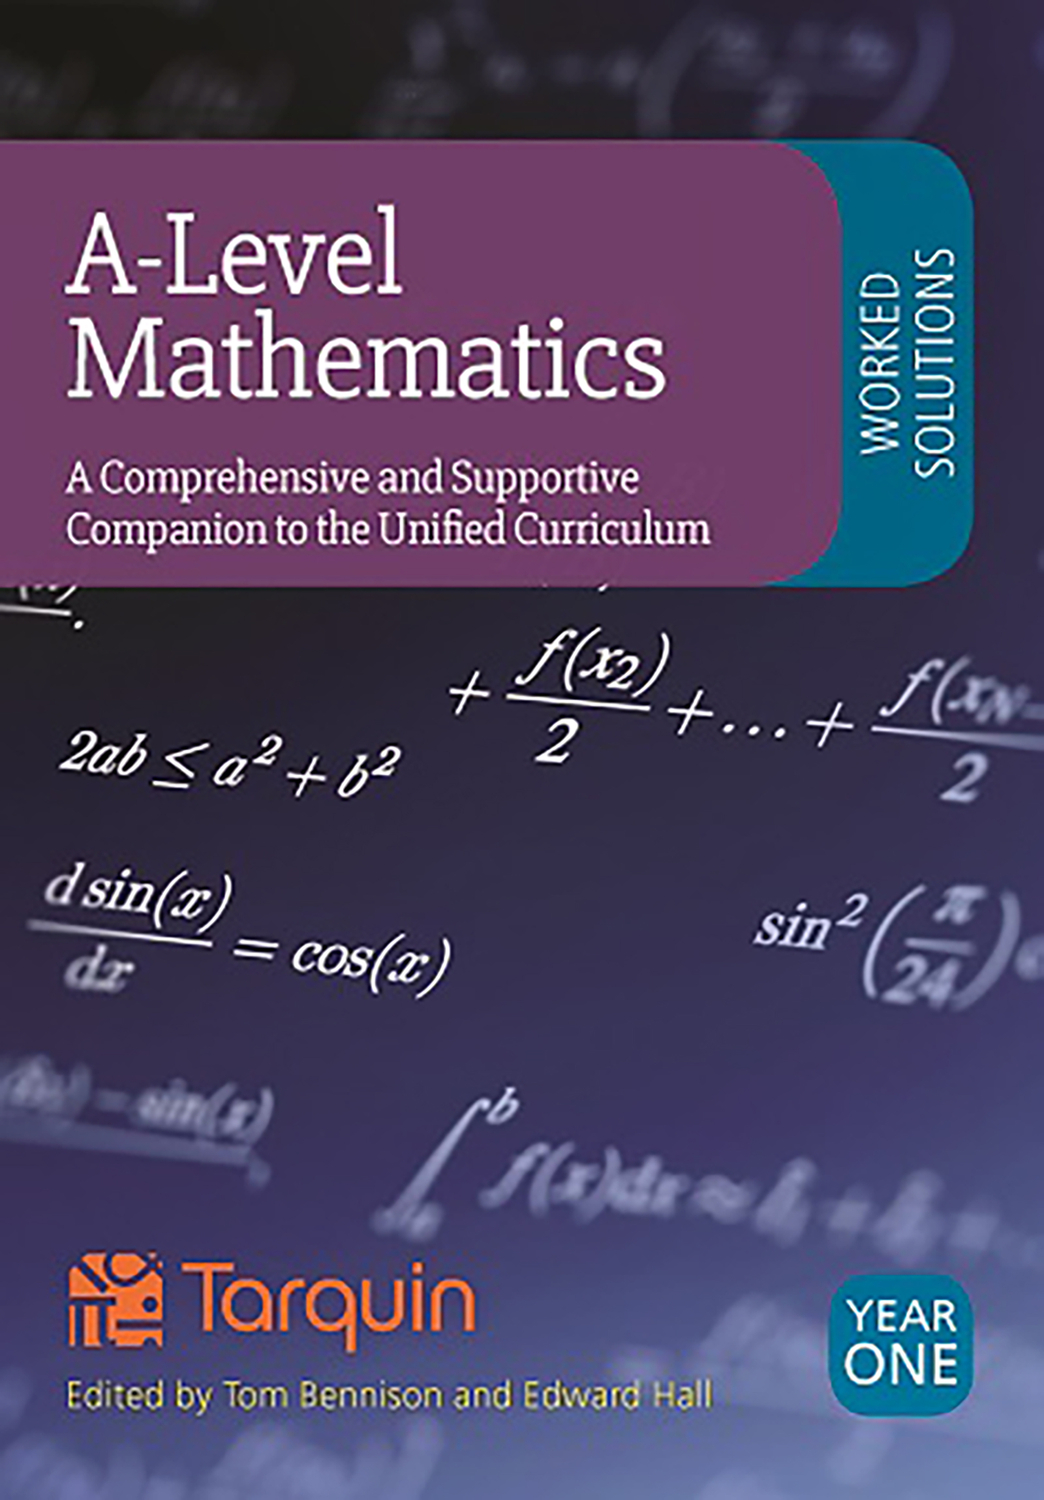 A-Level Mathematics Worked Solutions